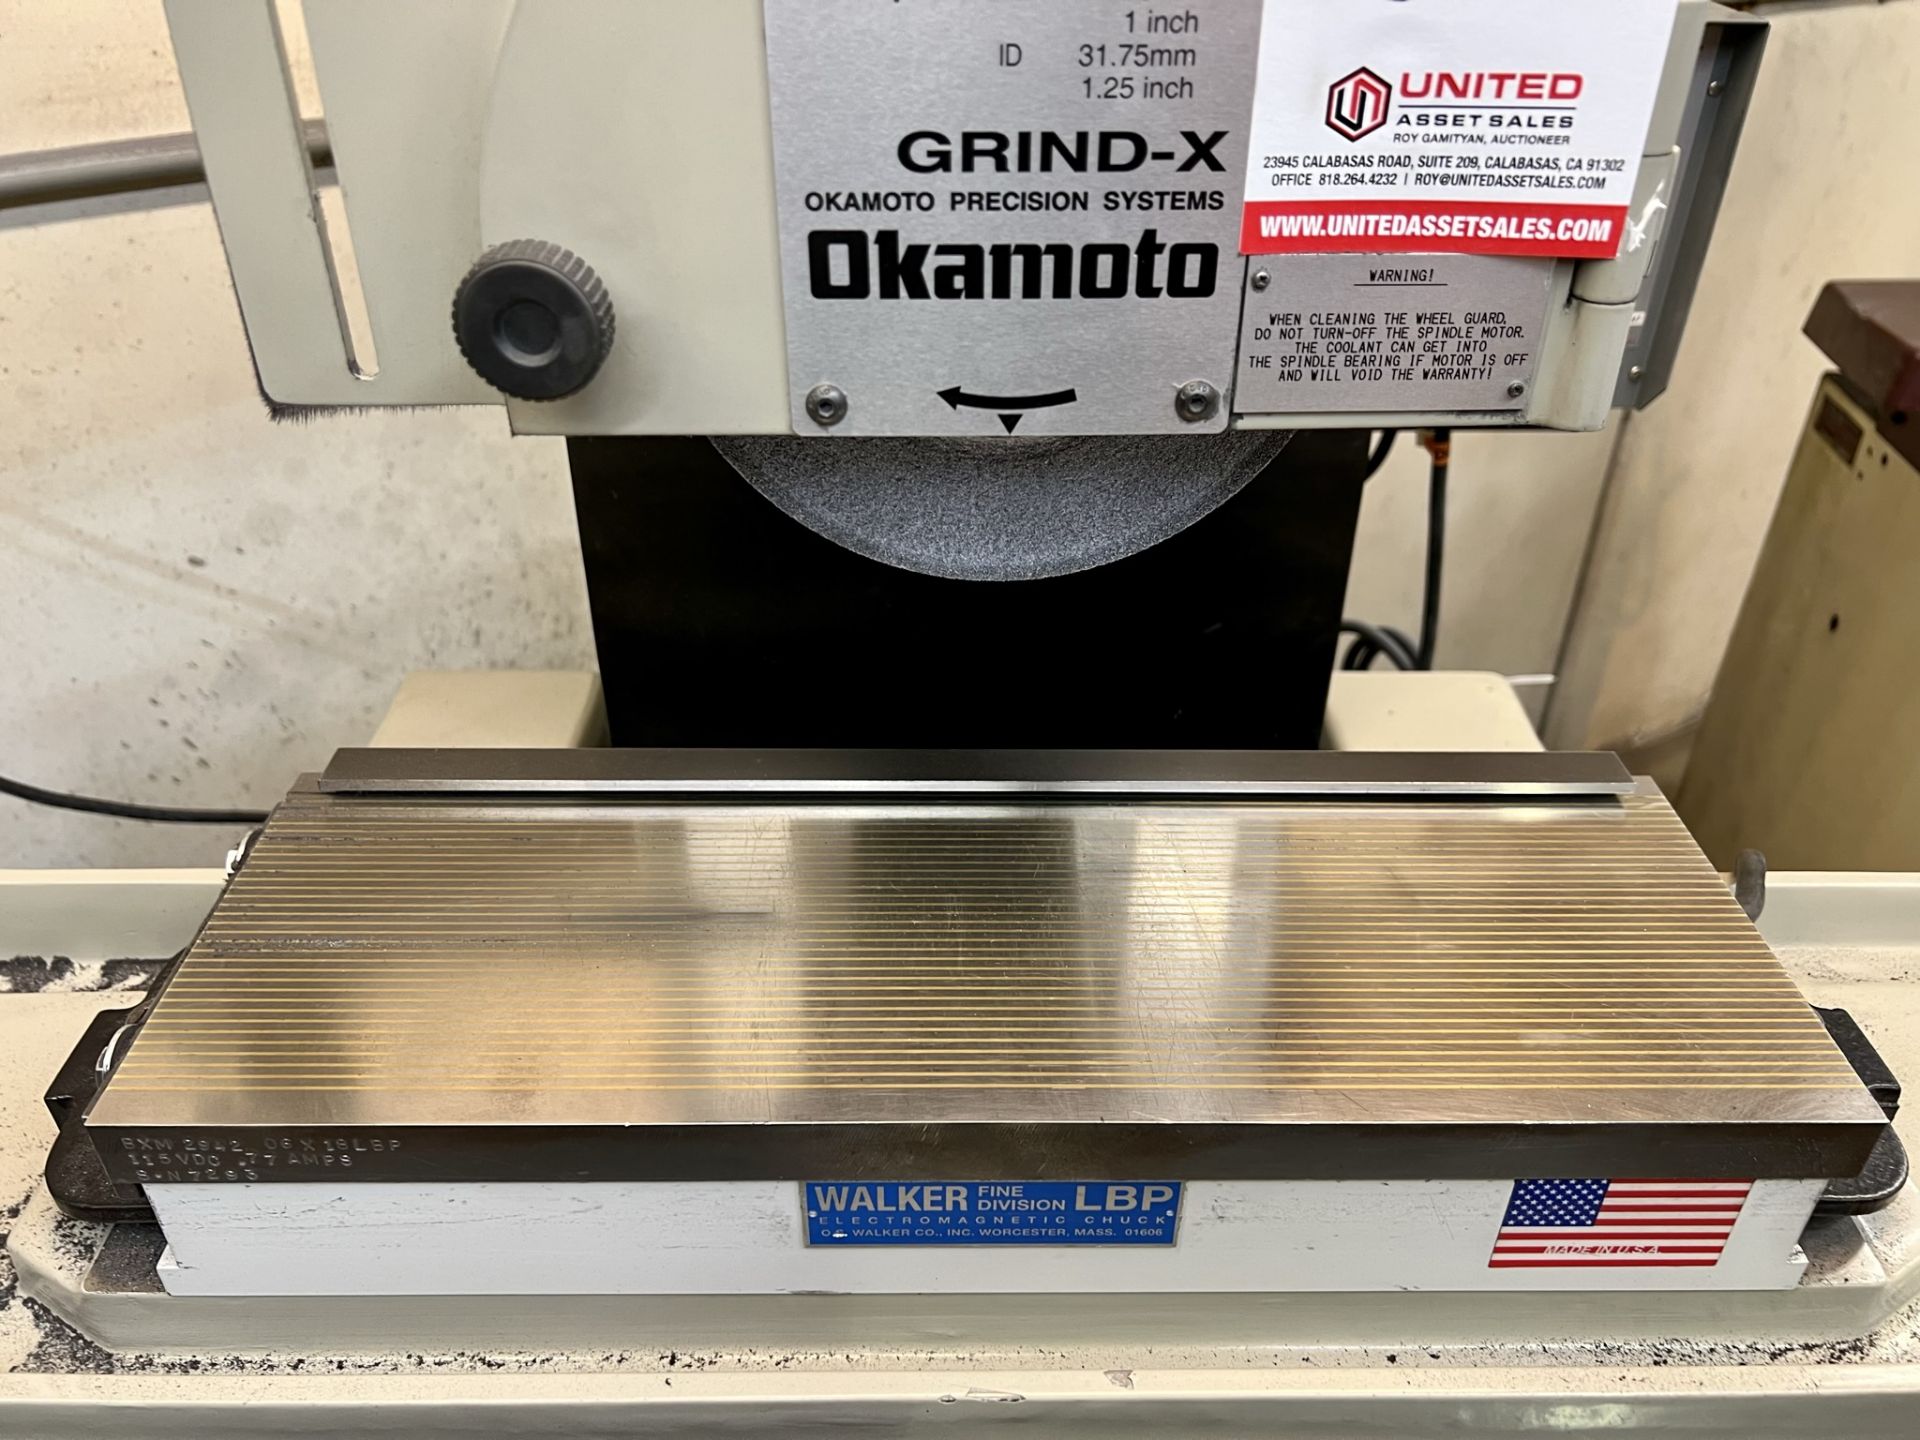 2018 OKAMOTO LINEAR 618B SURFACE GRINDER, S/N 48824, W/ WALKER 18" X 6" MAGNETIC CHUCK AND CONTROLS, - Image 7 of 15